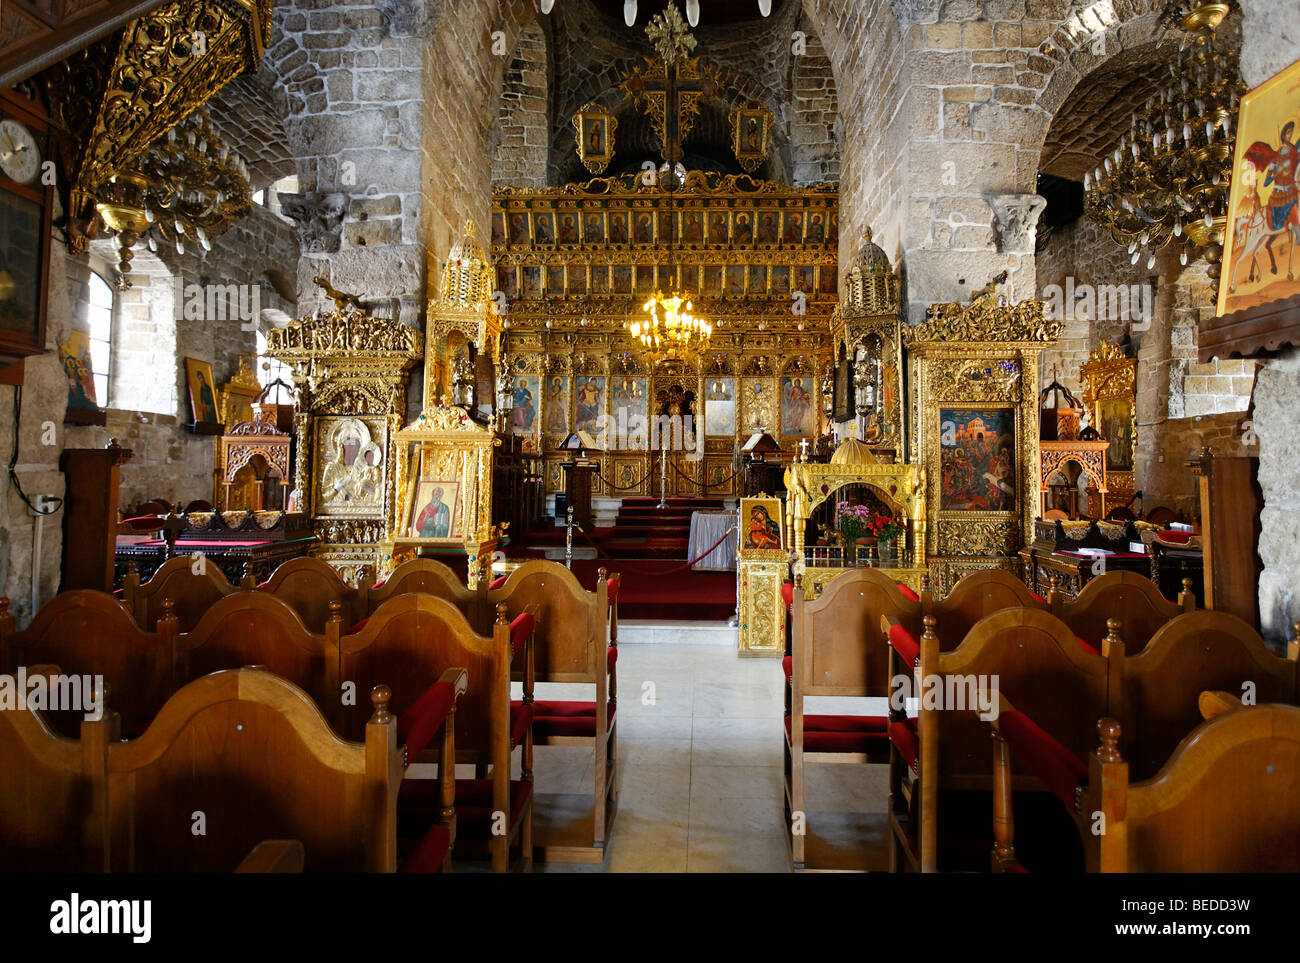 Interior of the Lazarus Church, altar, chairs, Larnaca, Cyprus, Asia Stock Photo